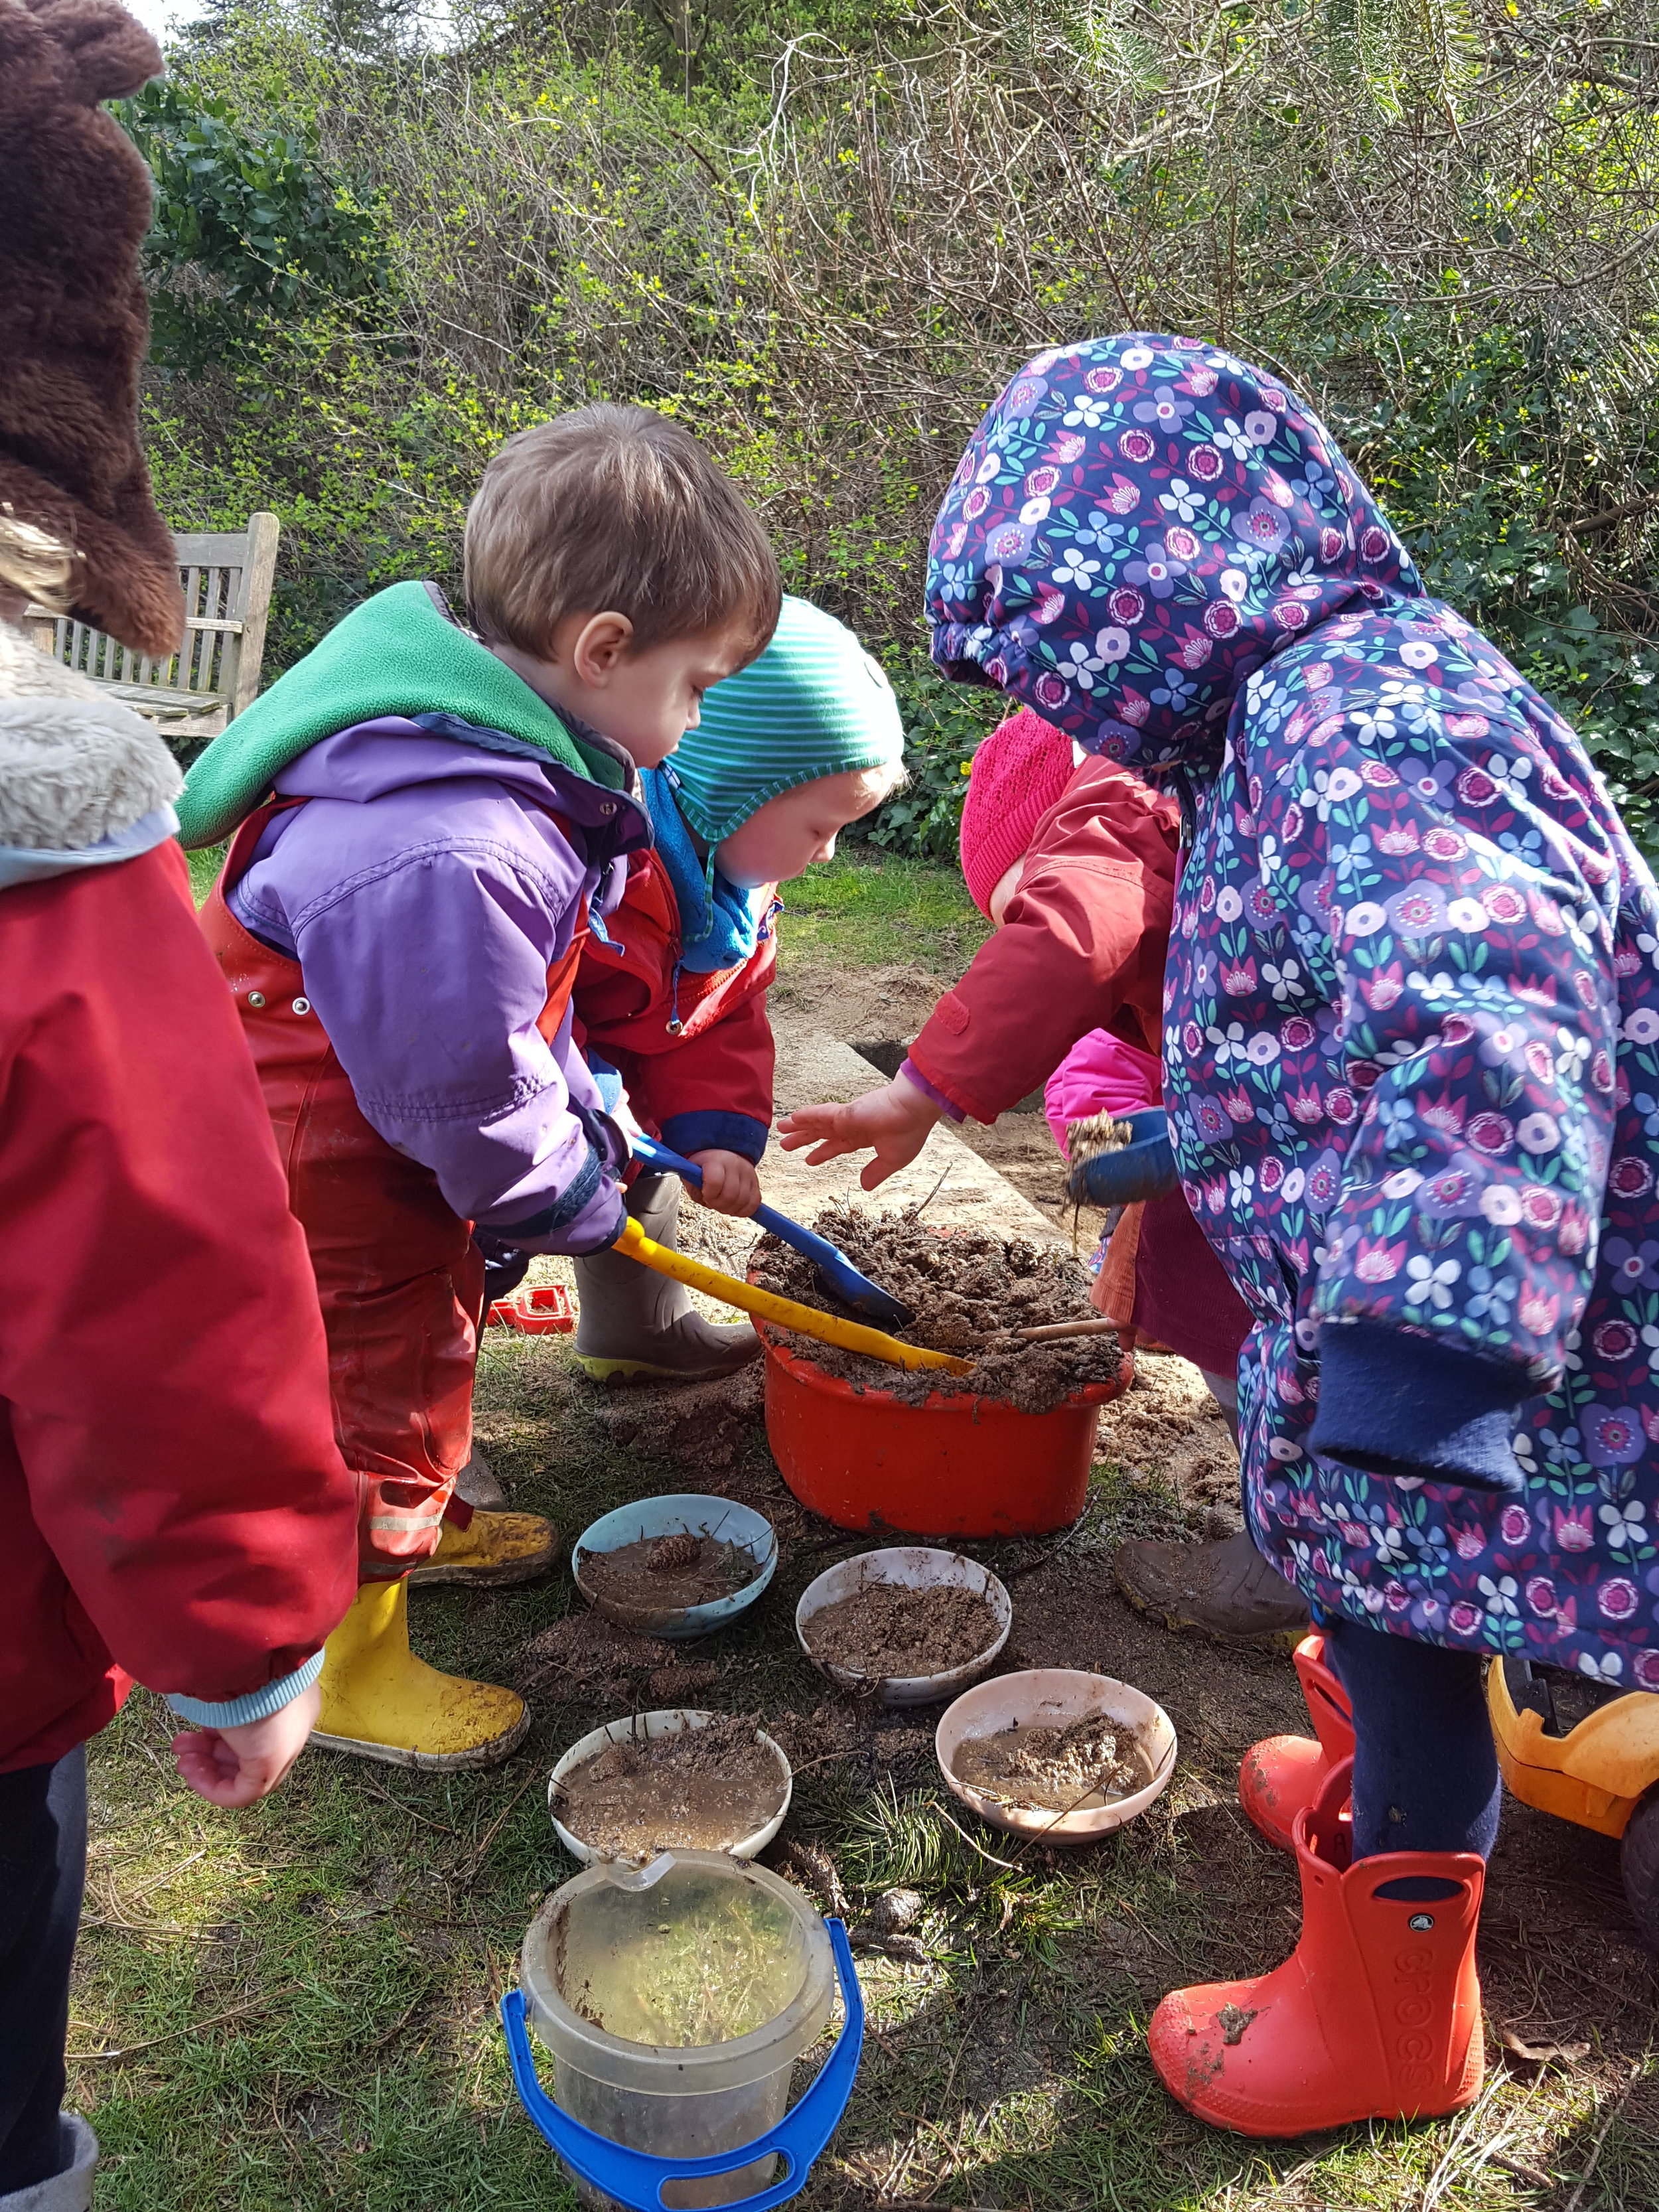  A joyful mud pie play session was enjoyed immensely! 